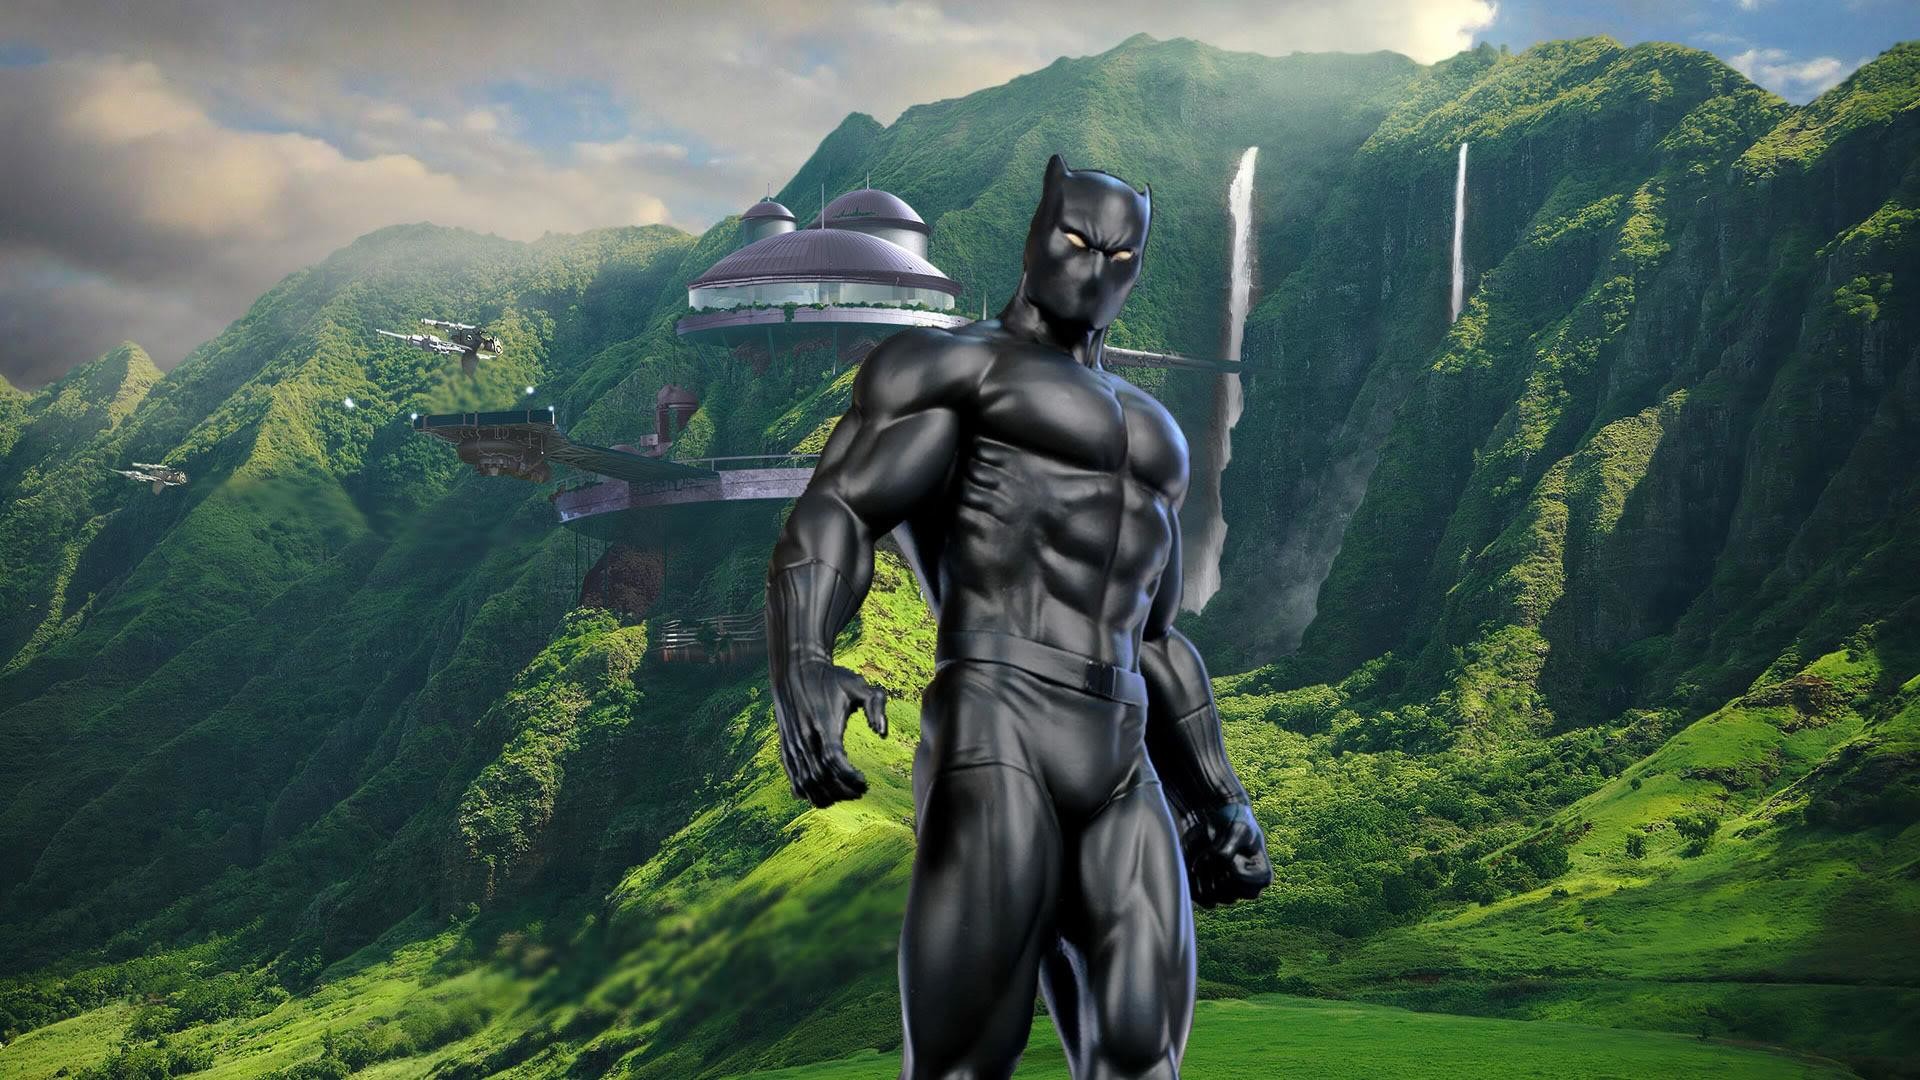 Download Black Panther wallpapers for mobile phone free Black Panther  HD pictures